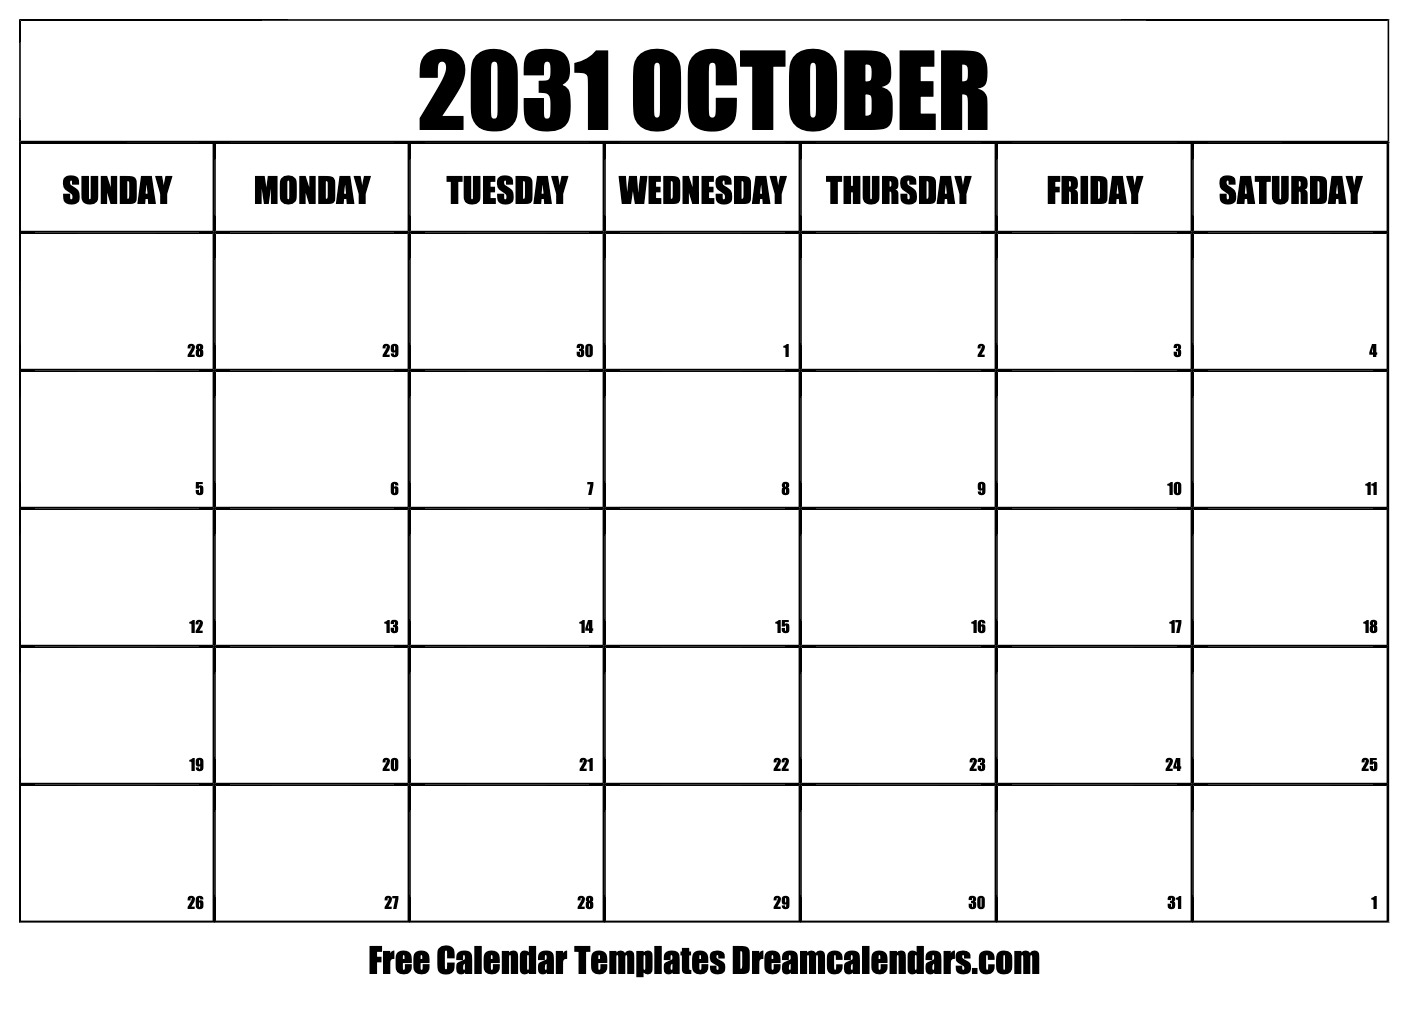 october-2031-calendar-free-blank-printable-with-holidays